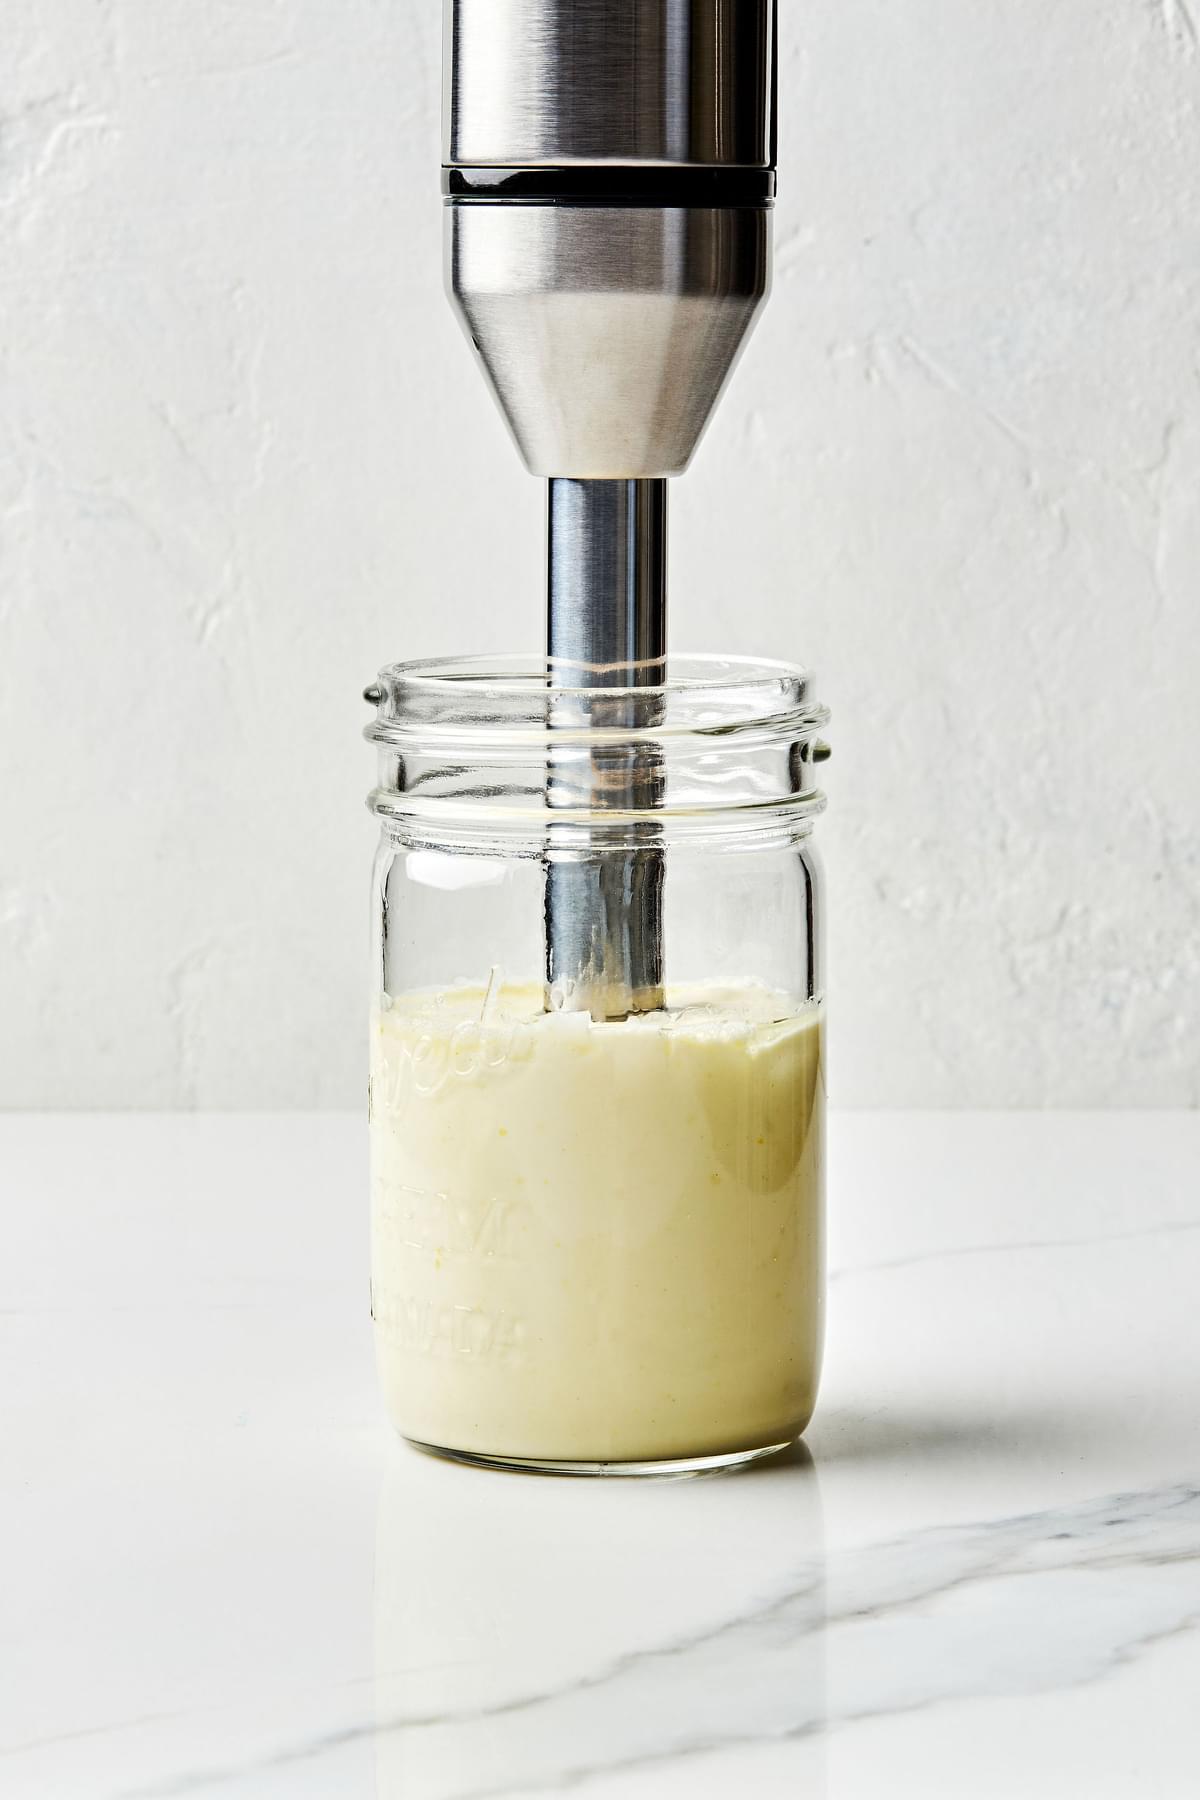 homemade mayonnaise being blended with an immersion blender in a glass mason jar